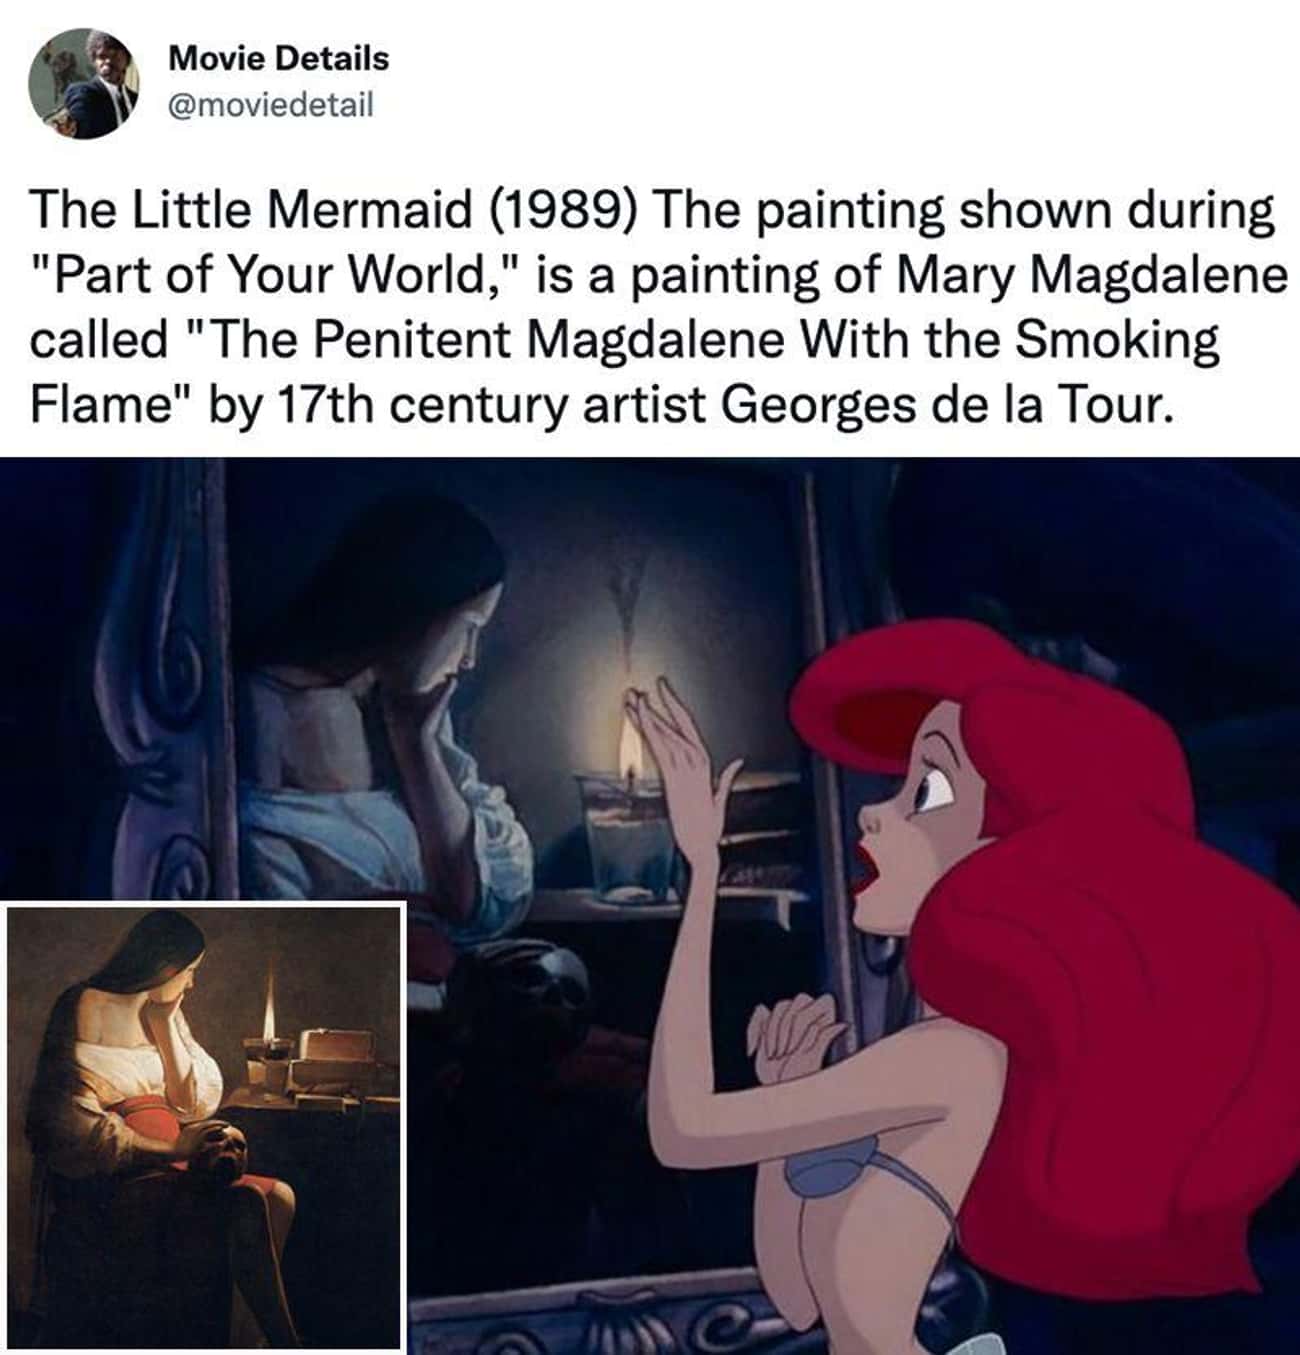 'The Penitent Magdalene With the Smoking Flame' In 'The Little Mermaid'